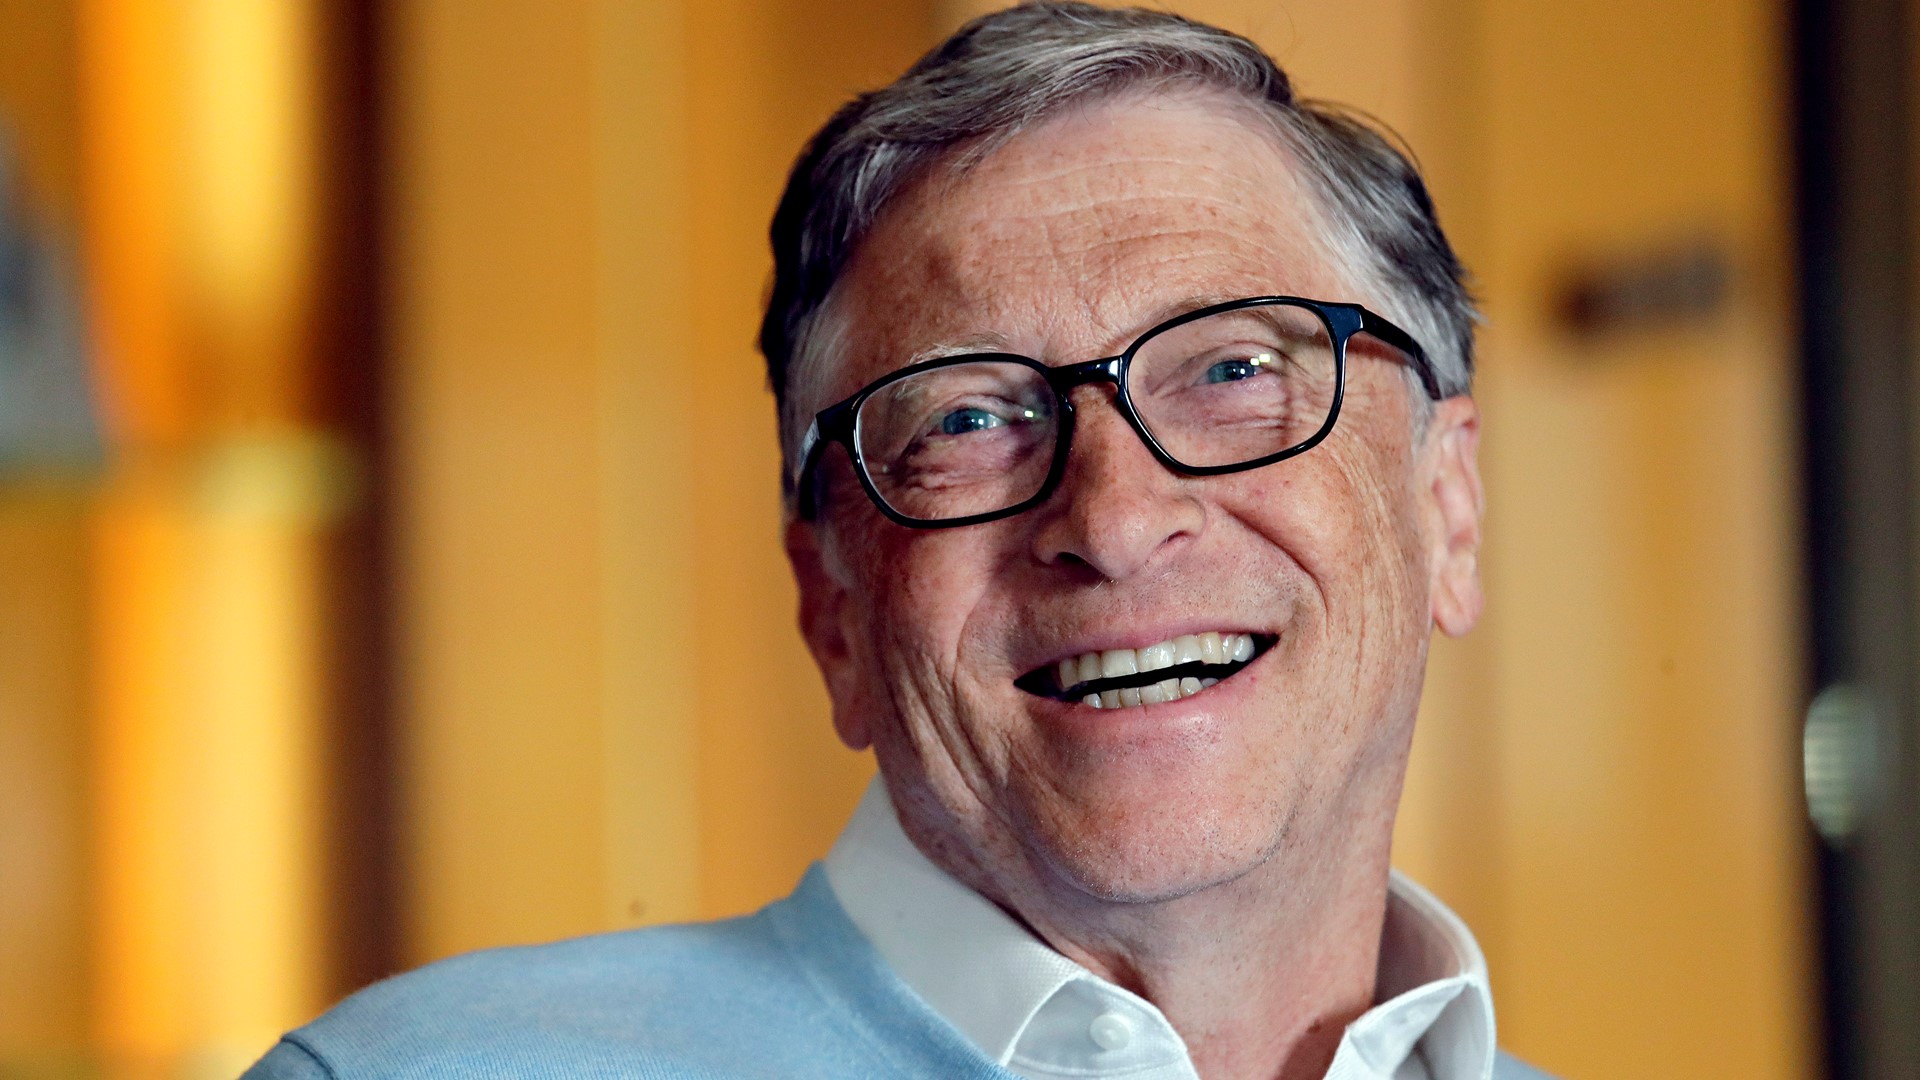 Bill Gates is behind a global push to establish a vaccine for the coronavirus, which he said could be distributed by the end of the year.